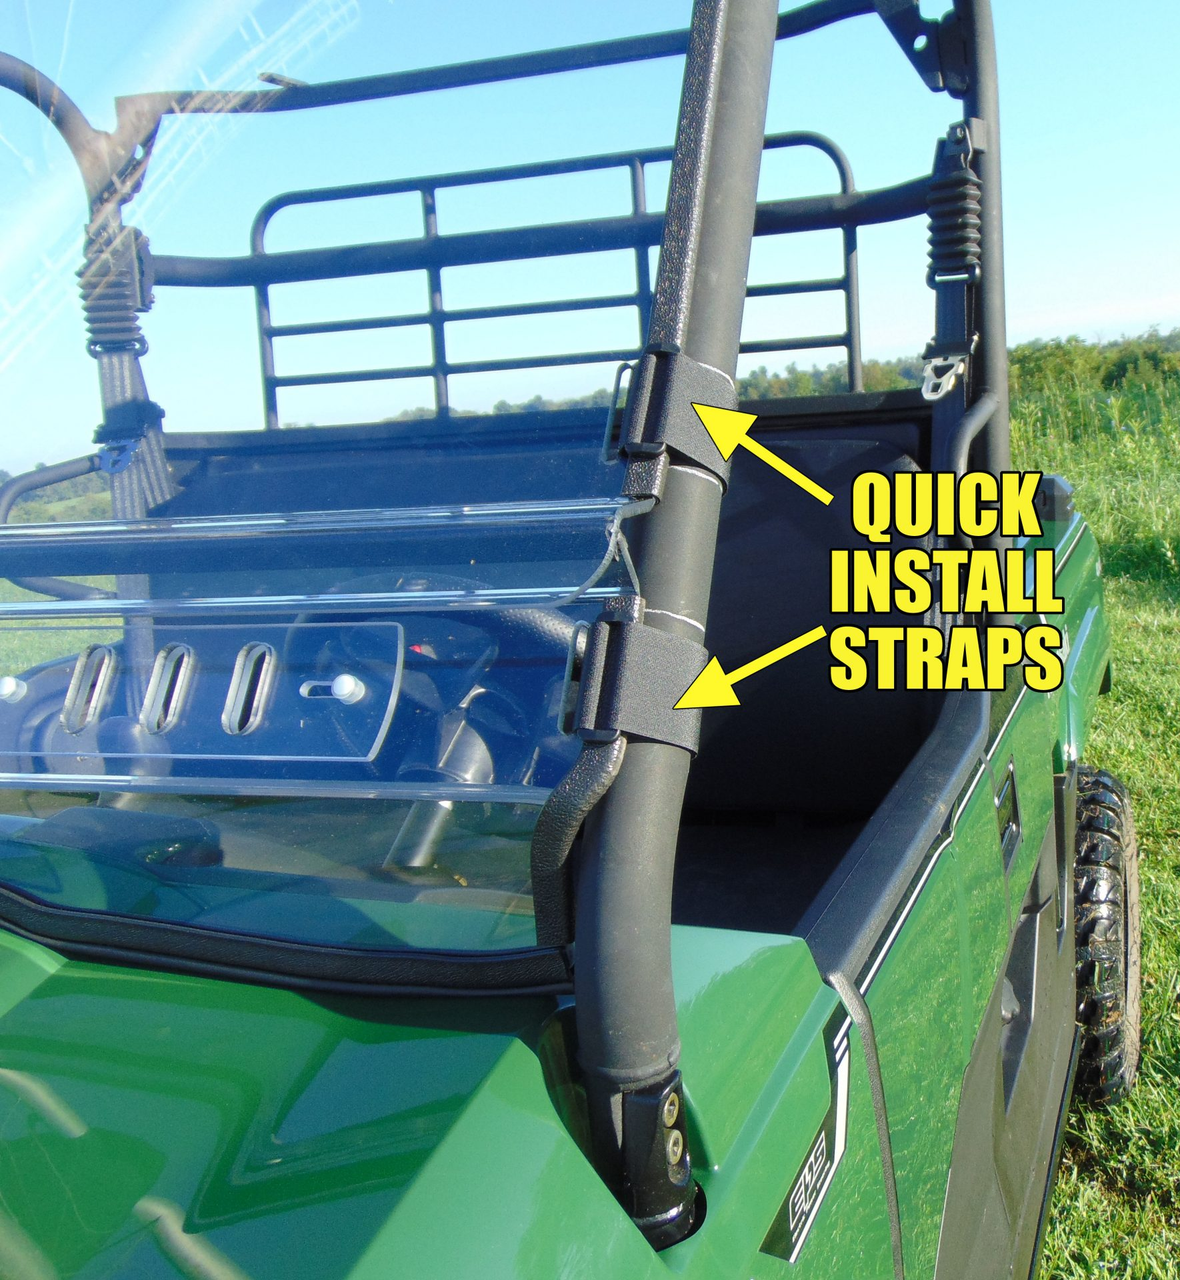 33 Star side x side Z-Force 500 800 800ex 1000 windshield quick install straps